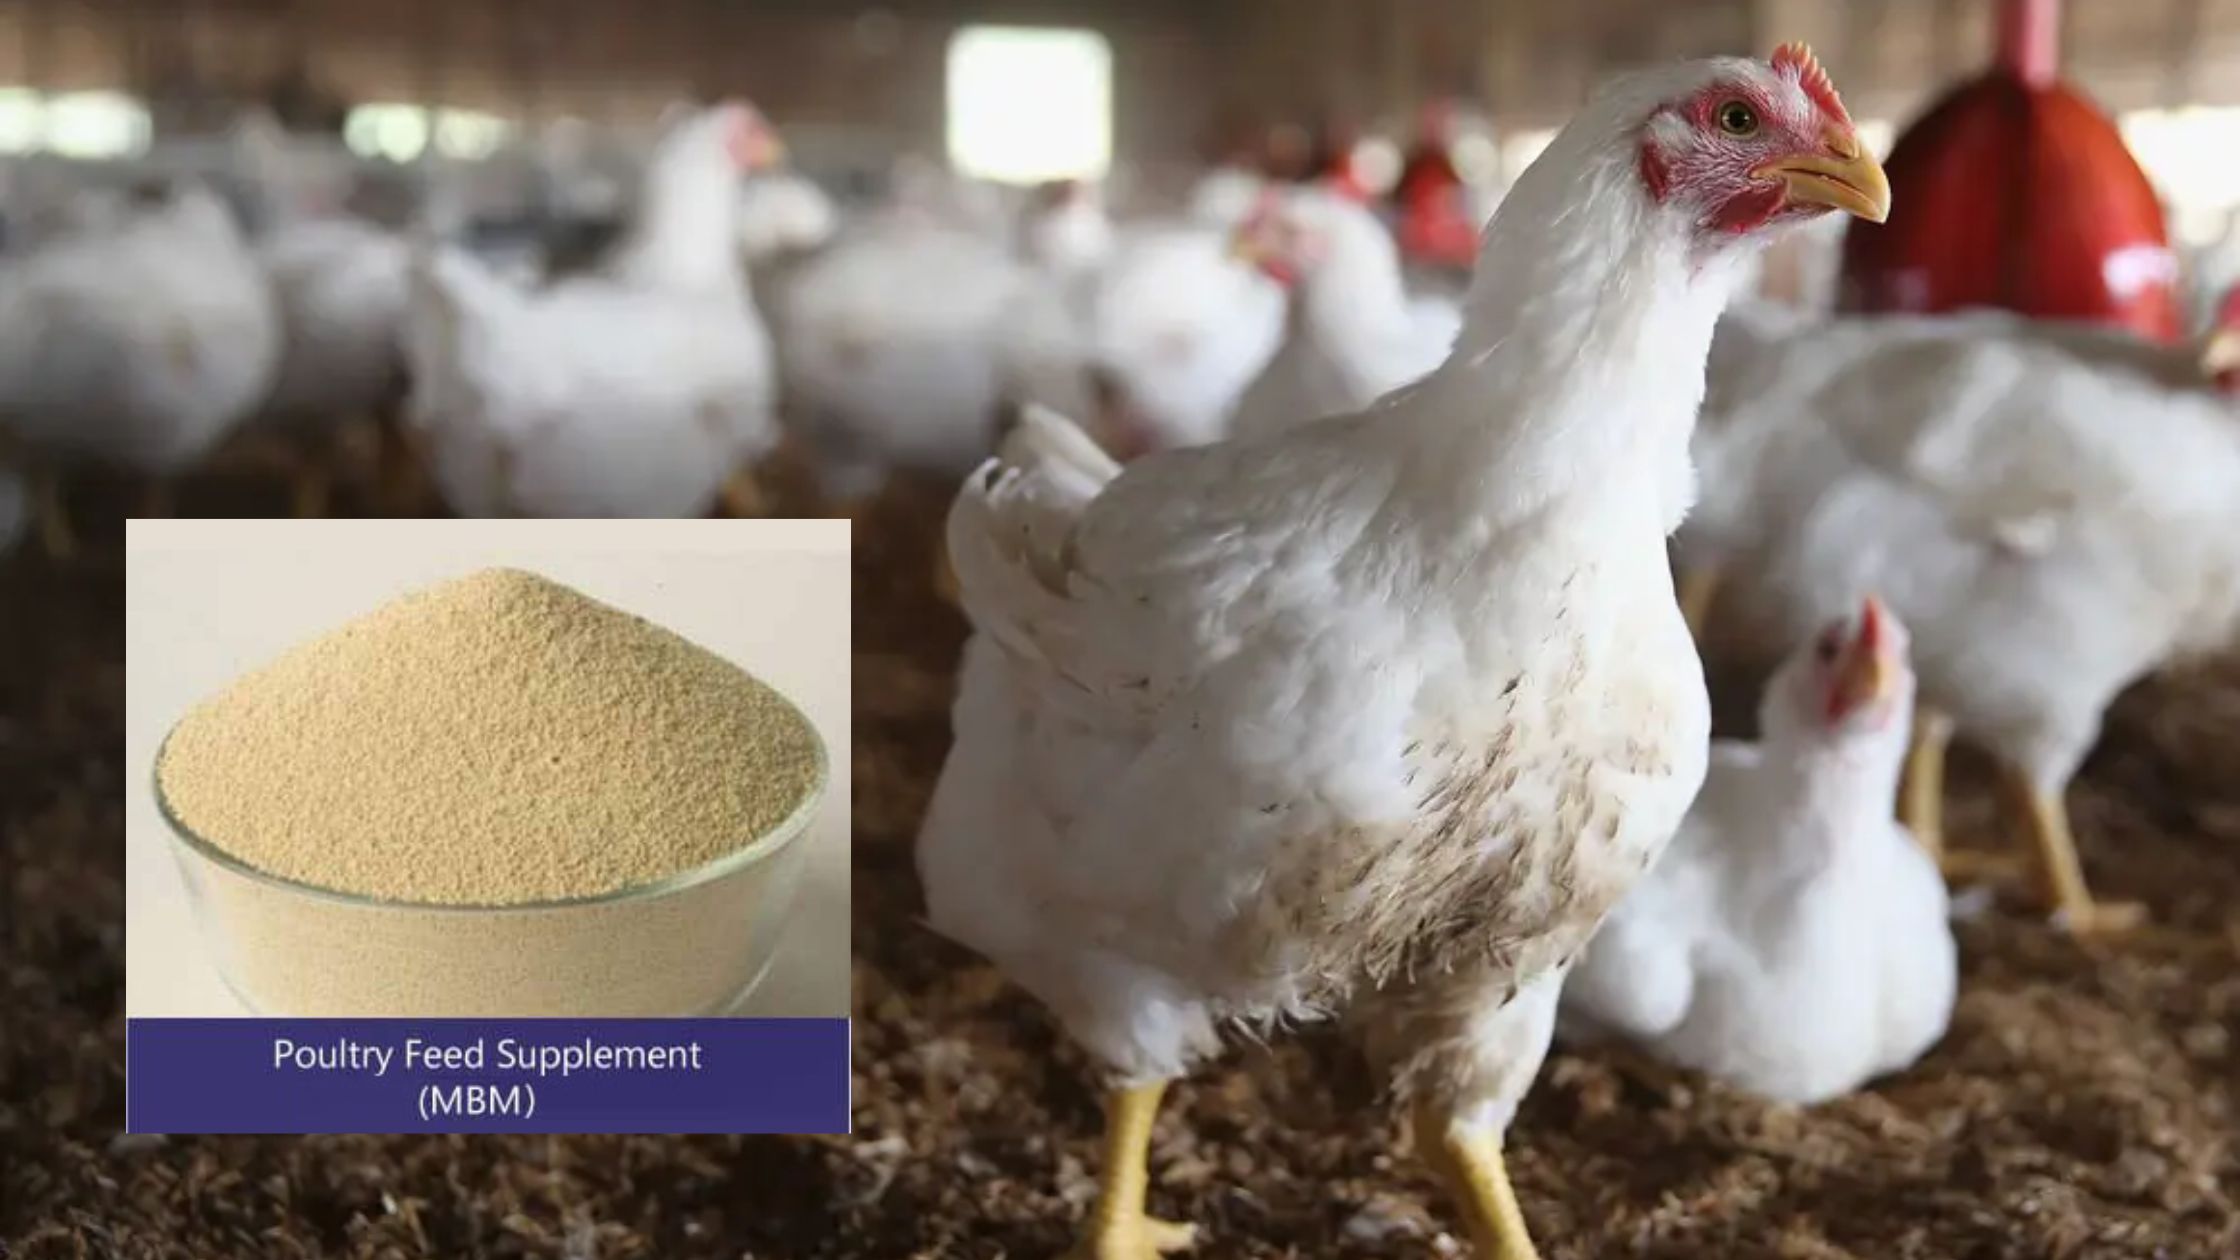 Poultry Feed Supplement (MBM) for Broiler Performance